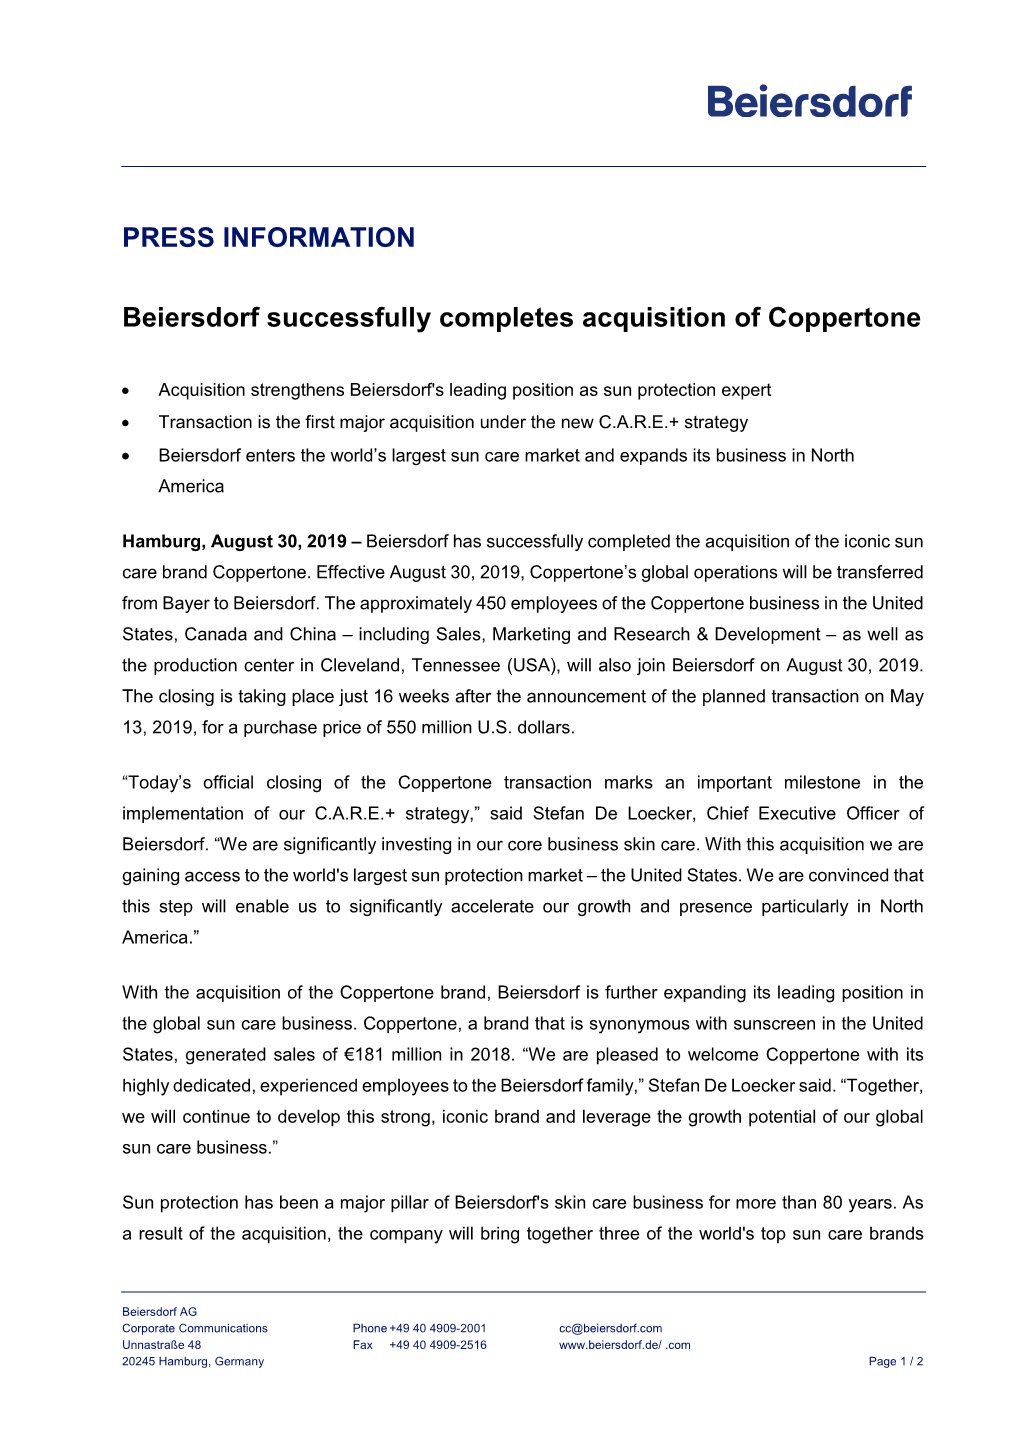 PRESS INFORMATION Beiersdorf Successfully Completes Acquisition of Coppertone